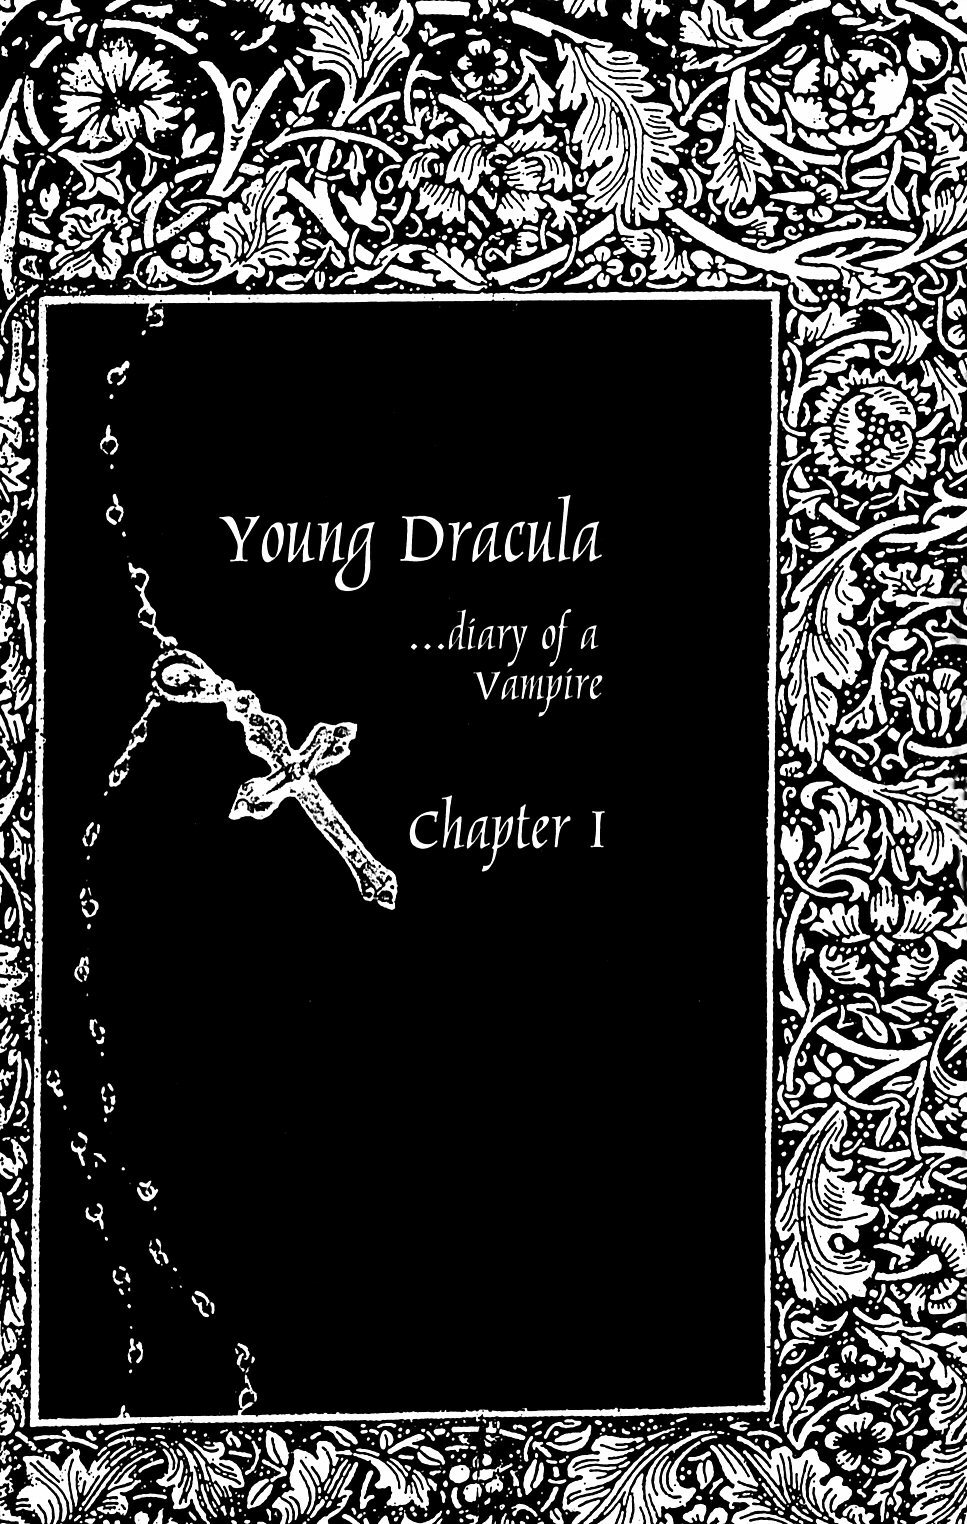 Read online Young Dracula: Diary of a Vampire comic -  Issue # TPB - 8